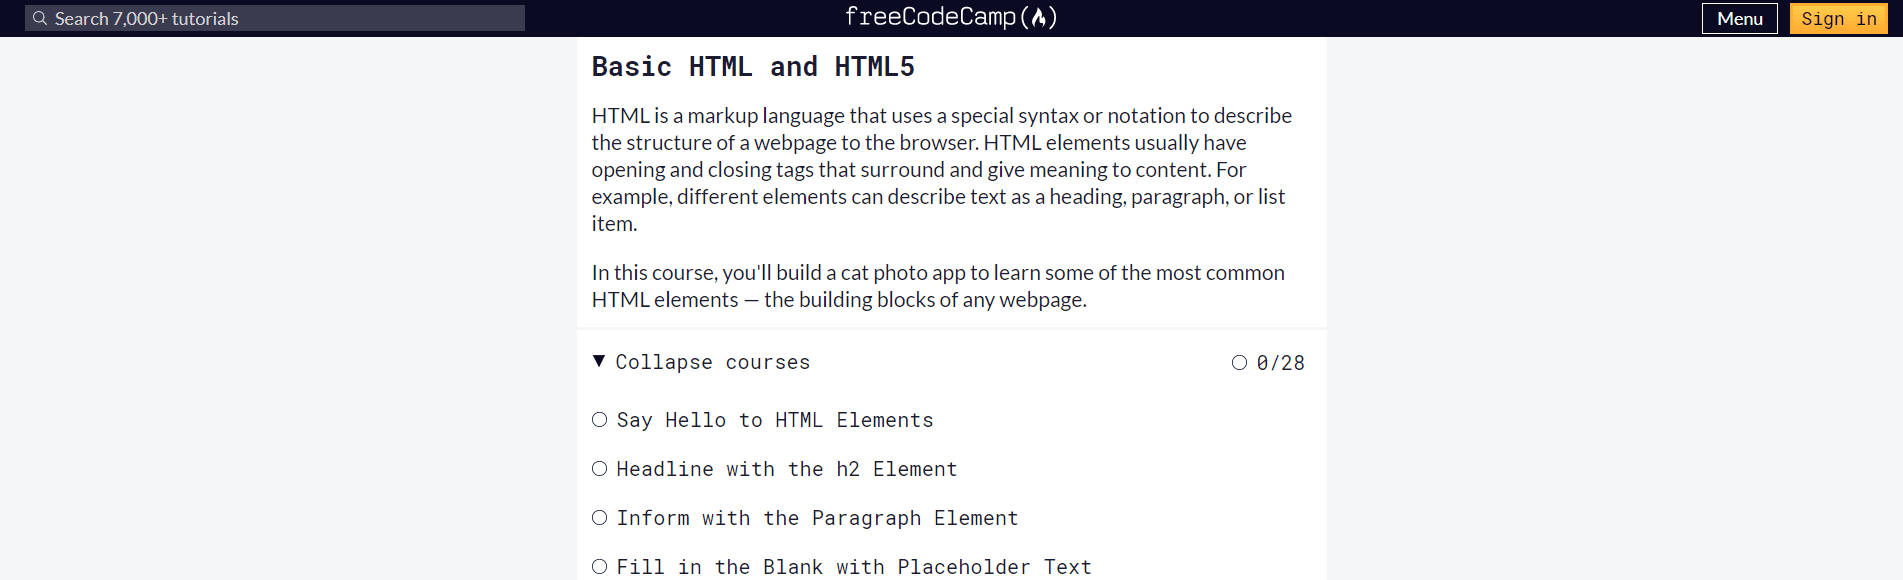 freeCodeCamp's curriculum includes basic HTML and HTML5 sections including Say Hello to HTML Elements, Headline with the h2 Element, Inform with the Paragraph Element, and Fill in the Blank with Placeholder Text.